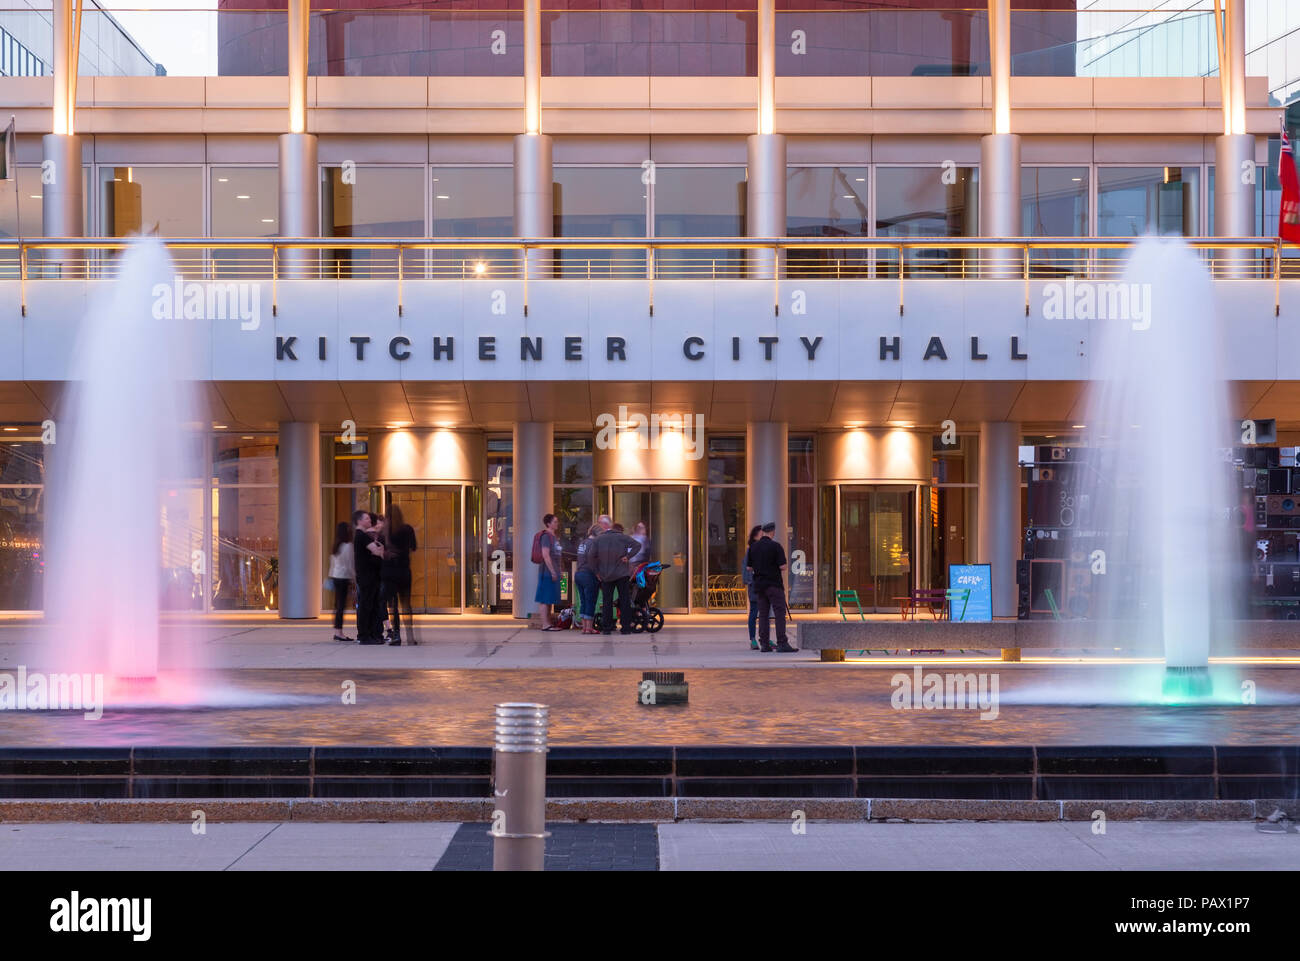 Kitchener City Hall Along King Street West At Dusk In Downtown Kitchener Ontario Canada PAX1P7 